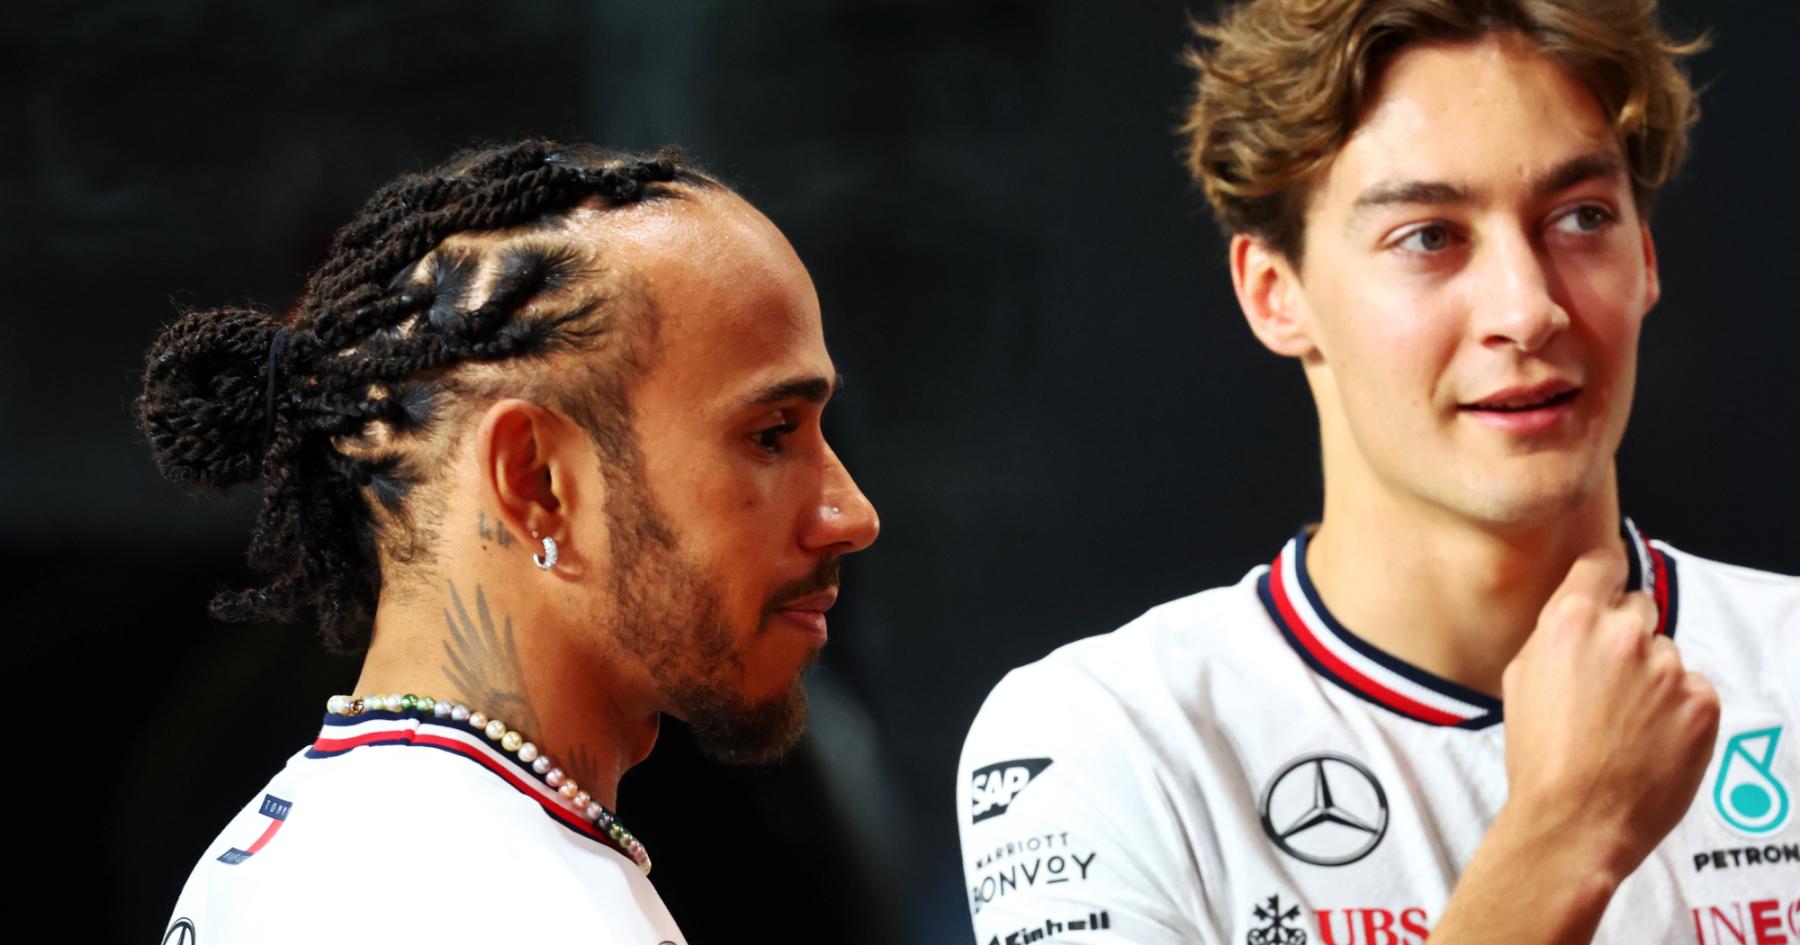 Russell predicts a fiery resurgence for Mercedes following Hamilton's exit